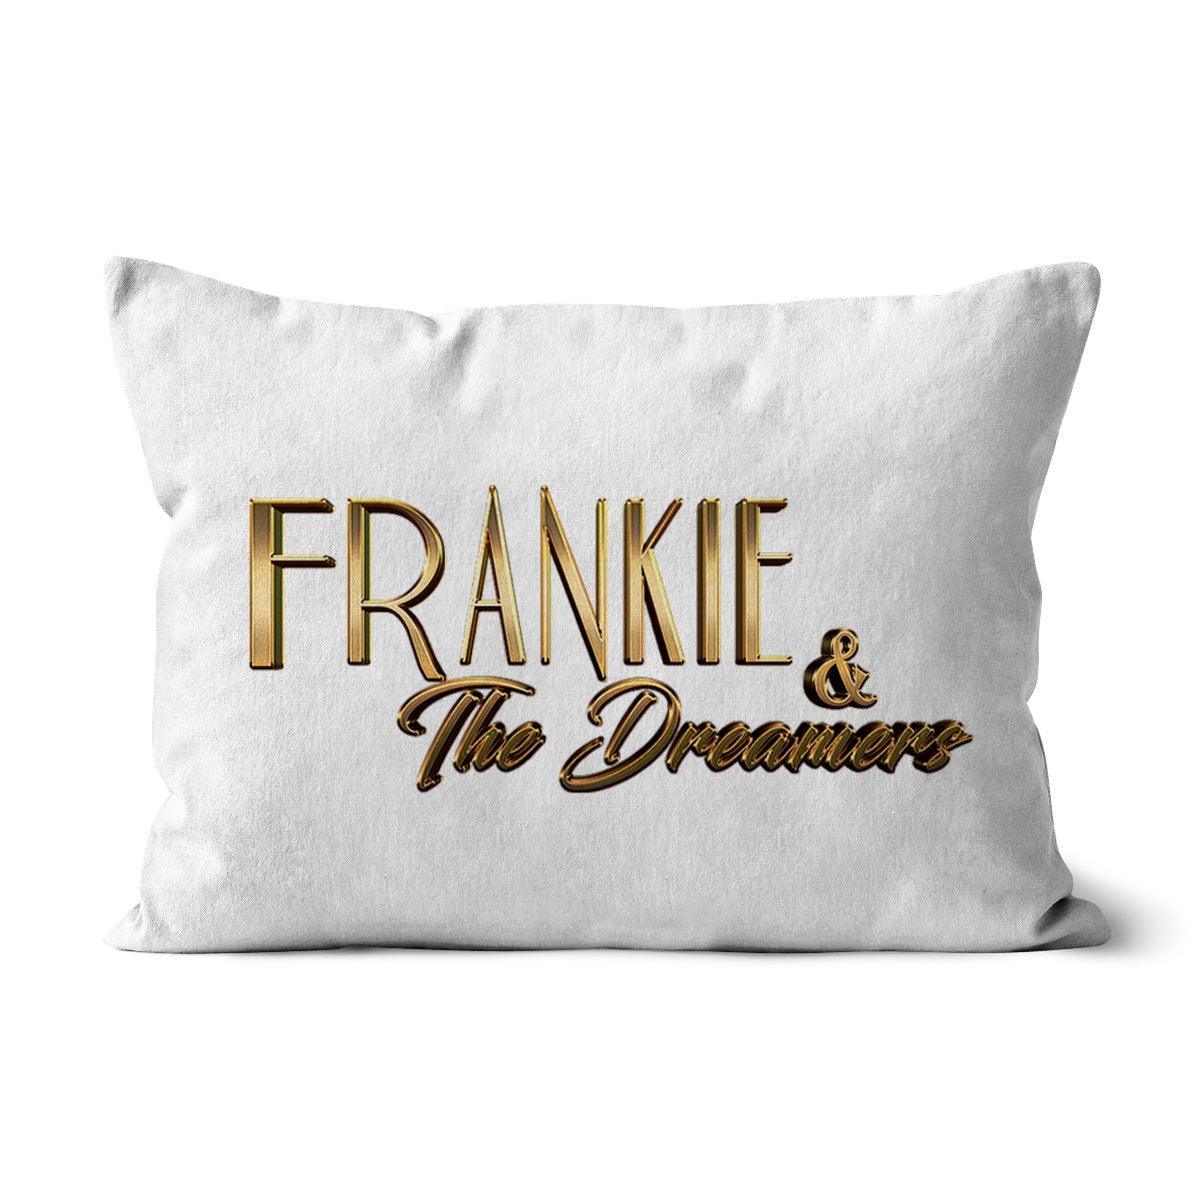 Frankie And The Dreamers Cushion | Homeware Linen 19"x13"